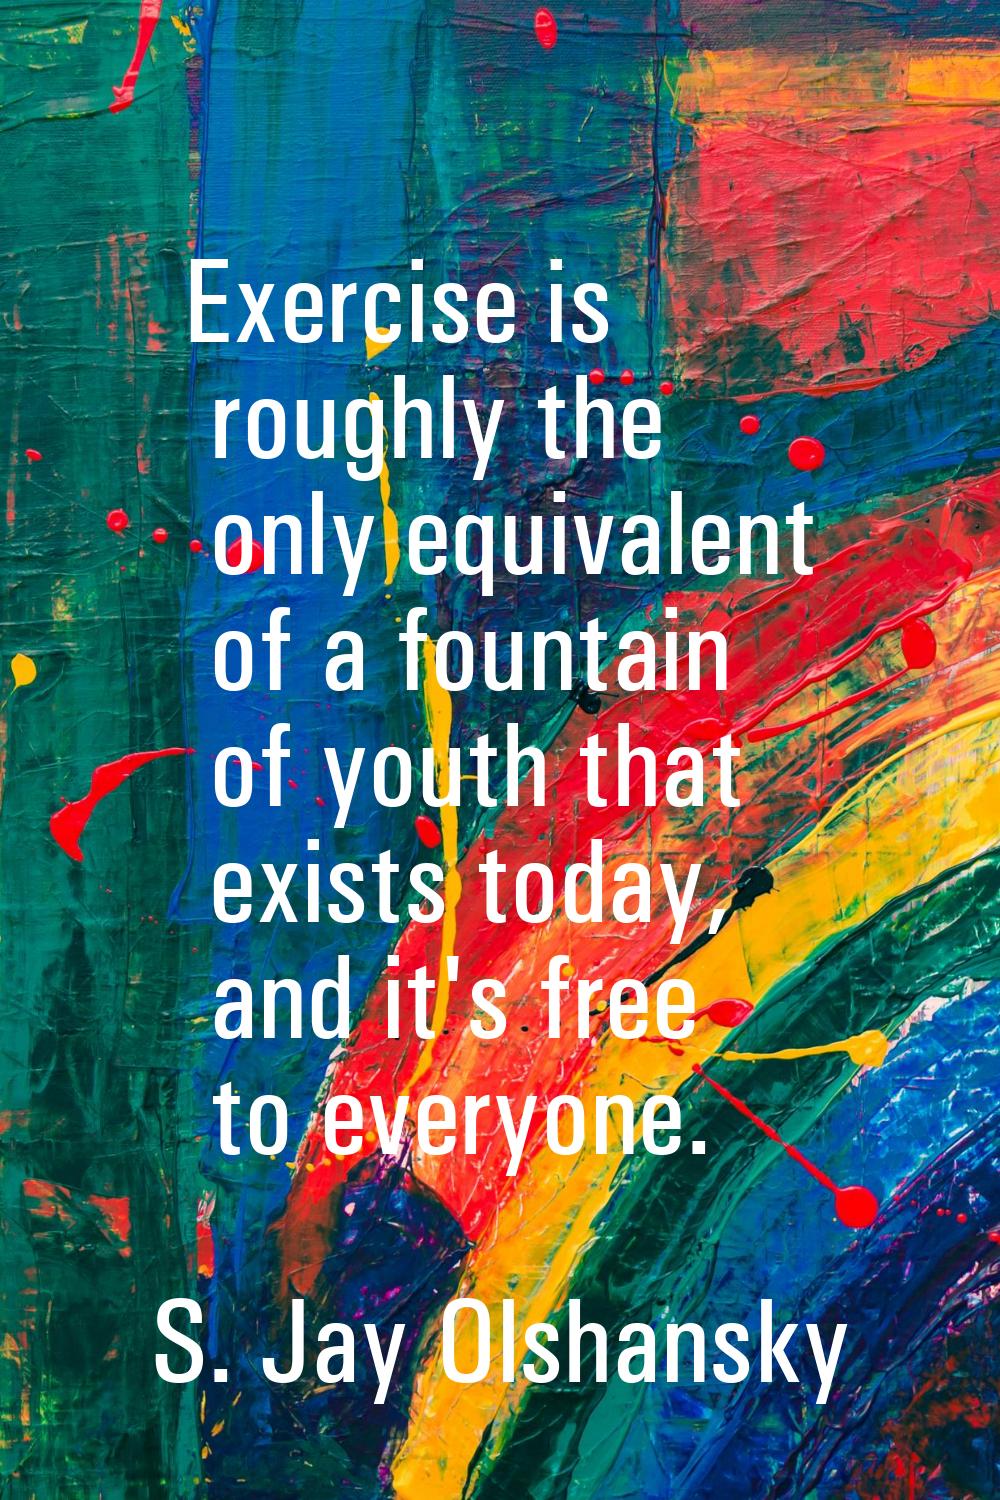 Exercise is roughly the only equivalent of a fountain of youth that exists today, and it's free to 